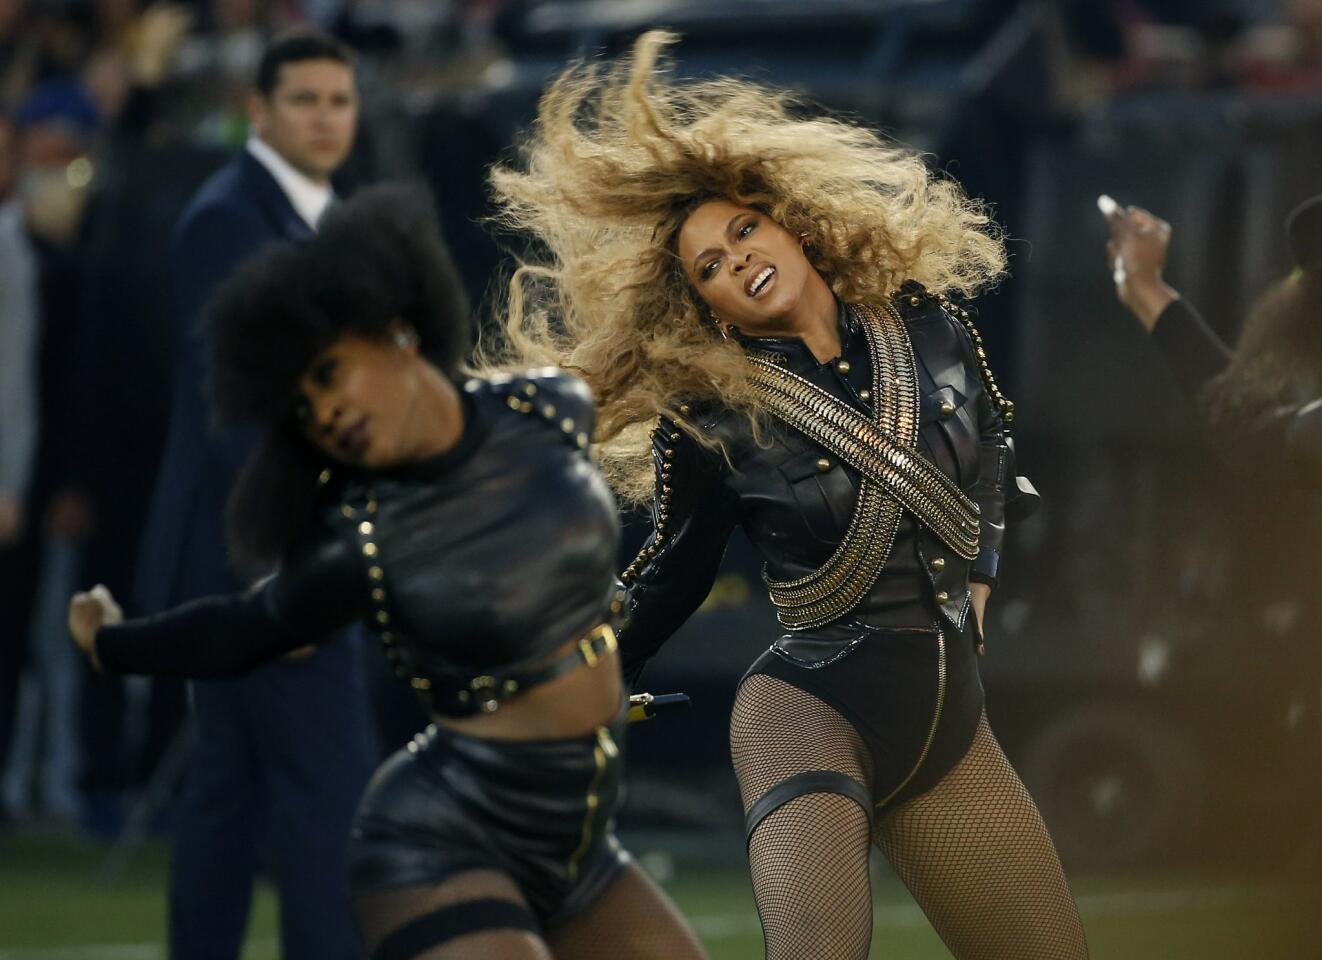 Beyonce performs during the half time show at Super Bowl 50 on Sunday. AP/Matt Slocum